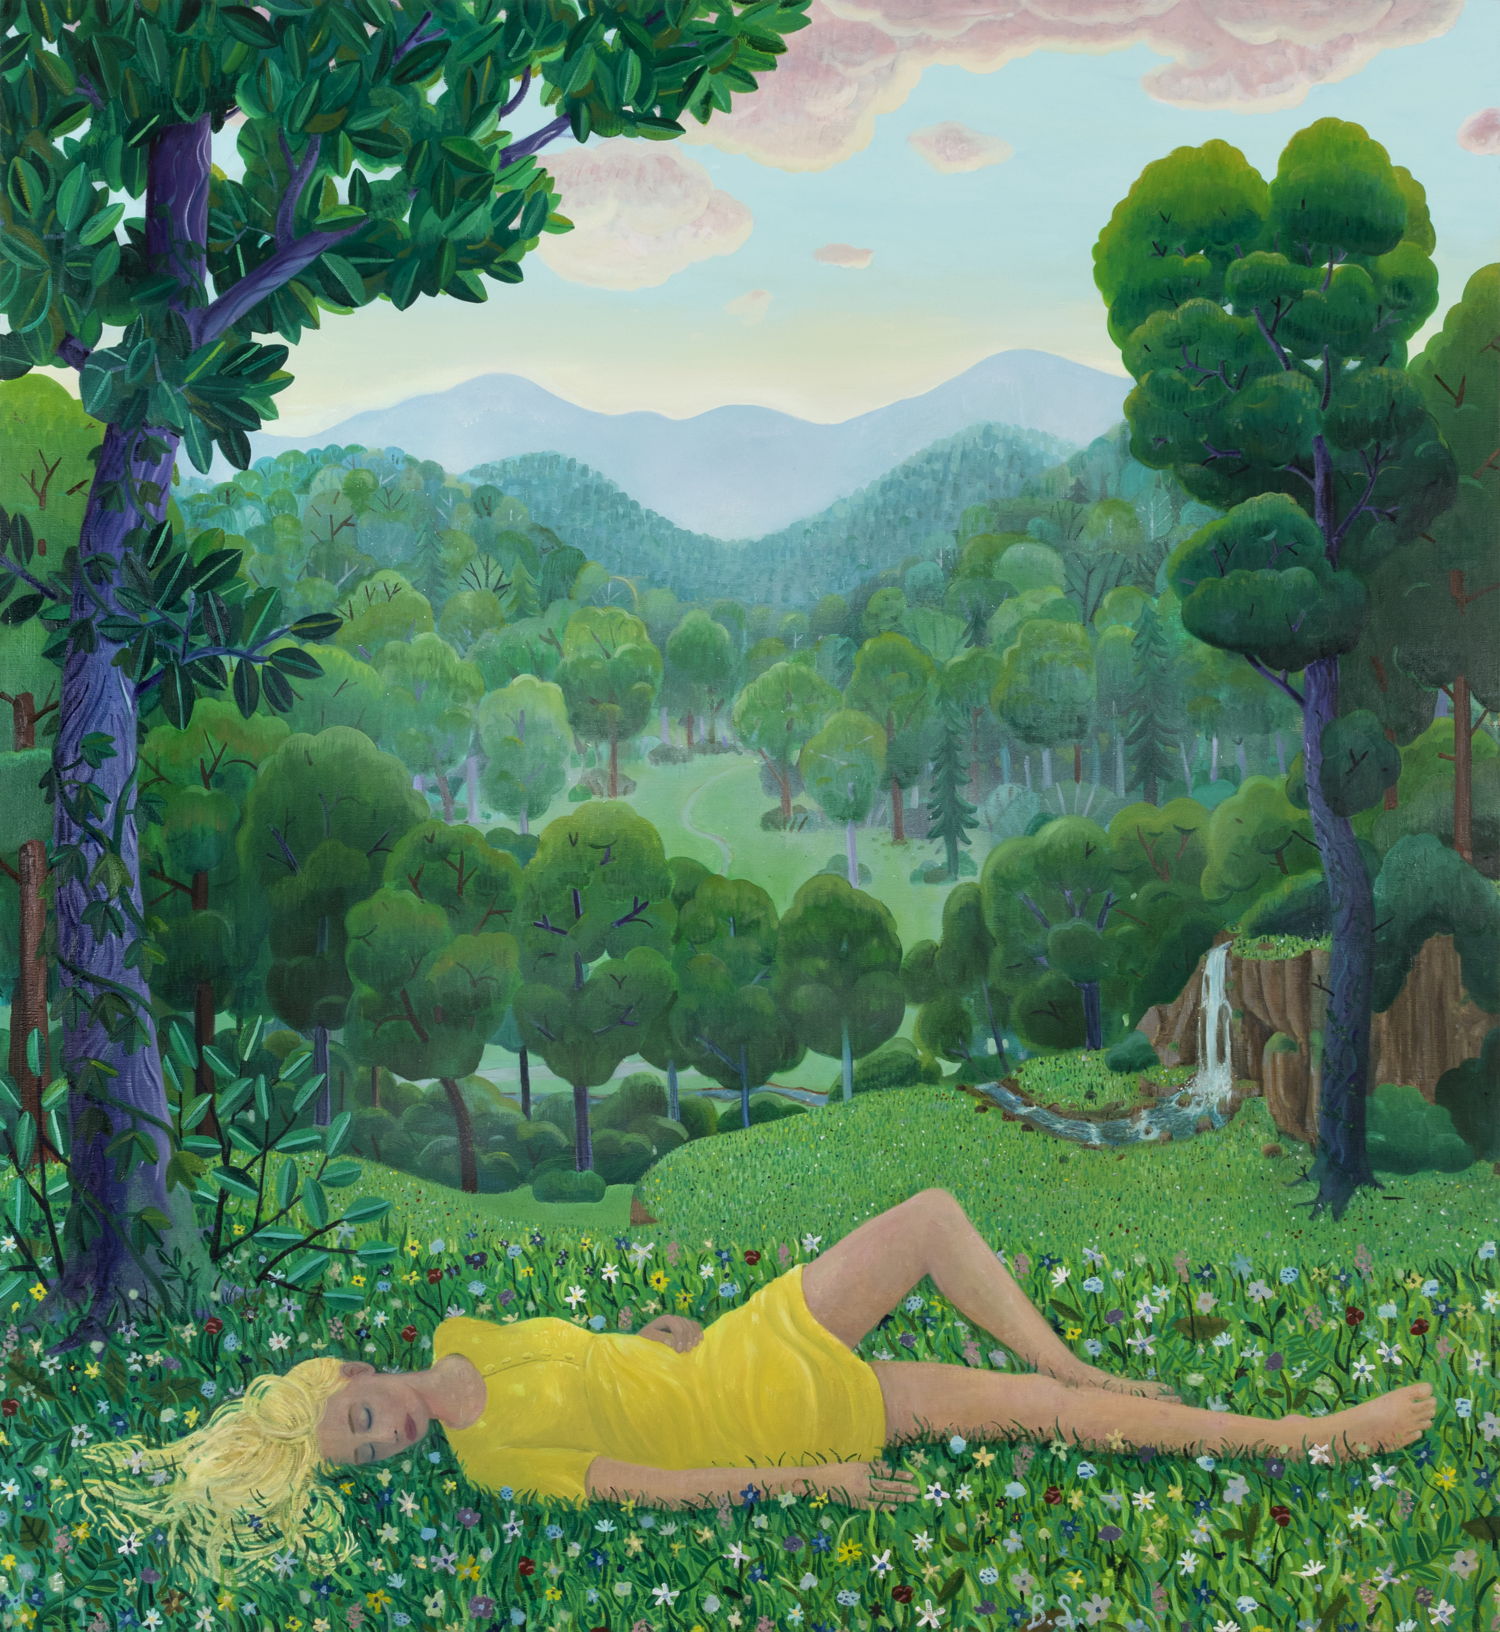 BEN SLEDSENS, Girl lying in the grass, 2019 - 2020. Oil and acrylic on canvas, 230 x 210 cm. Courtesy Tim Van Laere Gallery, Antwerp